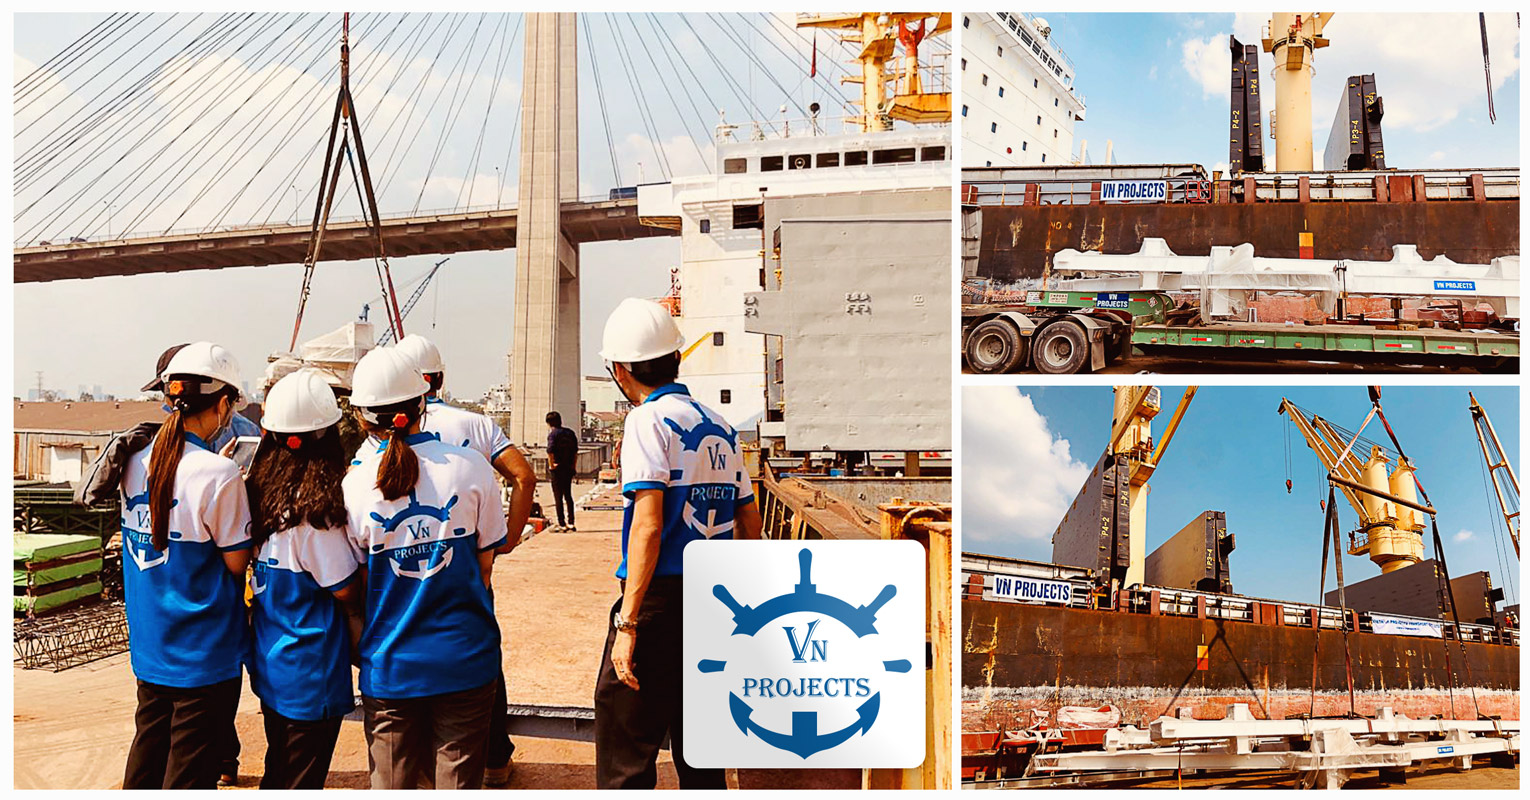 VN Projects loaded 8000 CBM of Project Cargo over the course of four days